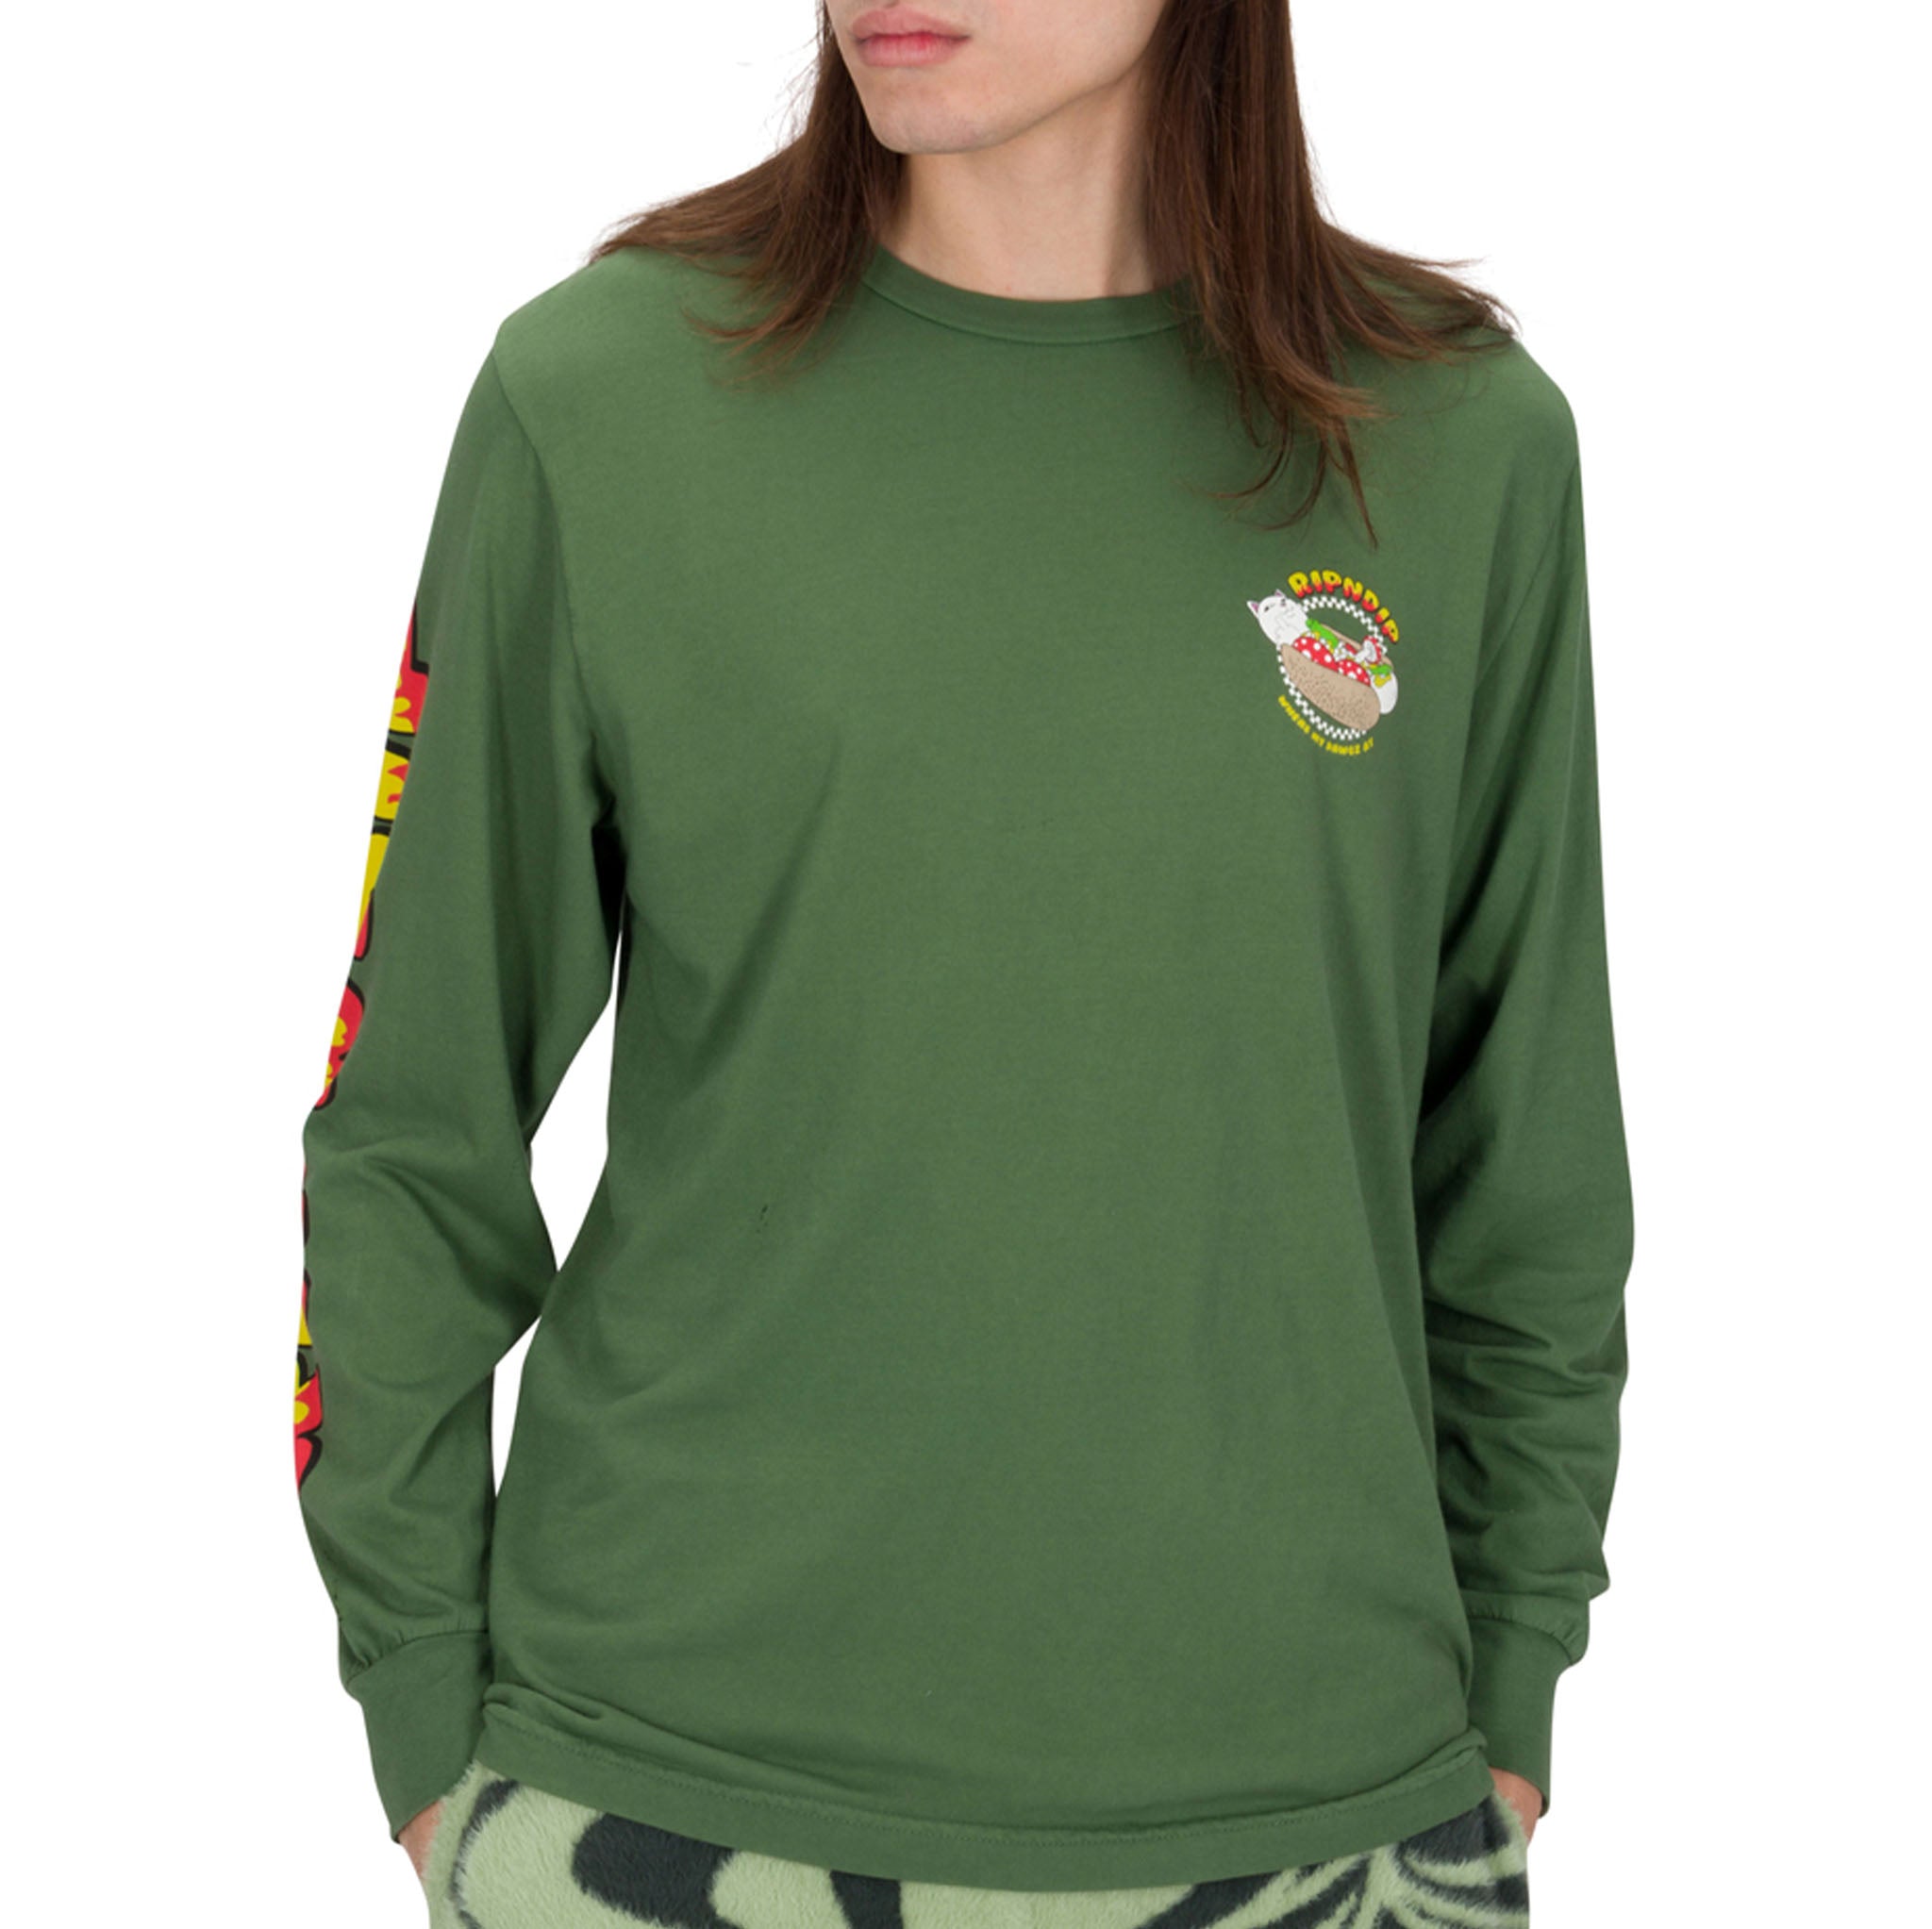 Glizzy Long Sleeve (Olive)